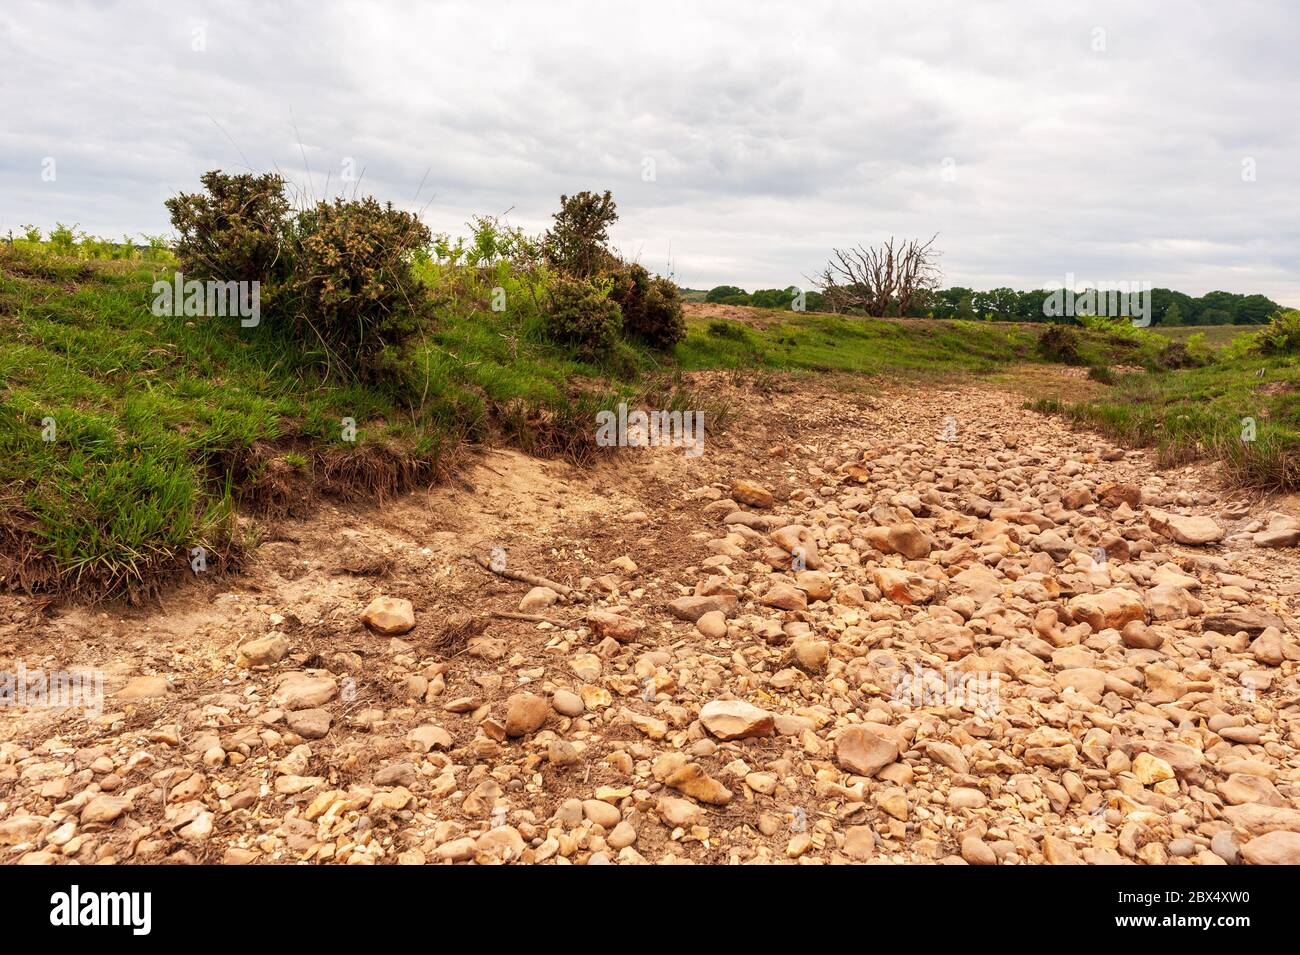 Dry river bed during a drought in the New Forest after an extremely dry and the sunniest spring on record, despite recent only light rainfall. Fire risk warnings have been in place for the South of England national park for several weeks, Godshill, Hampshire, UK, June 2020. Stock Photo